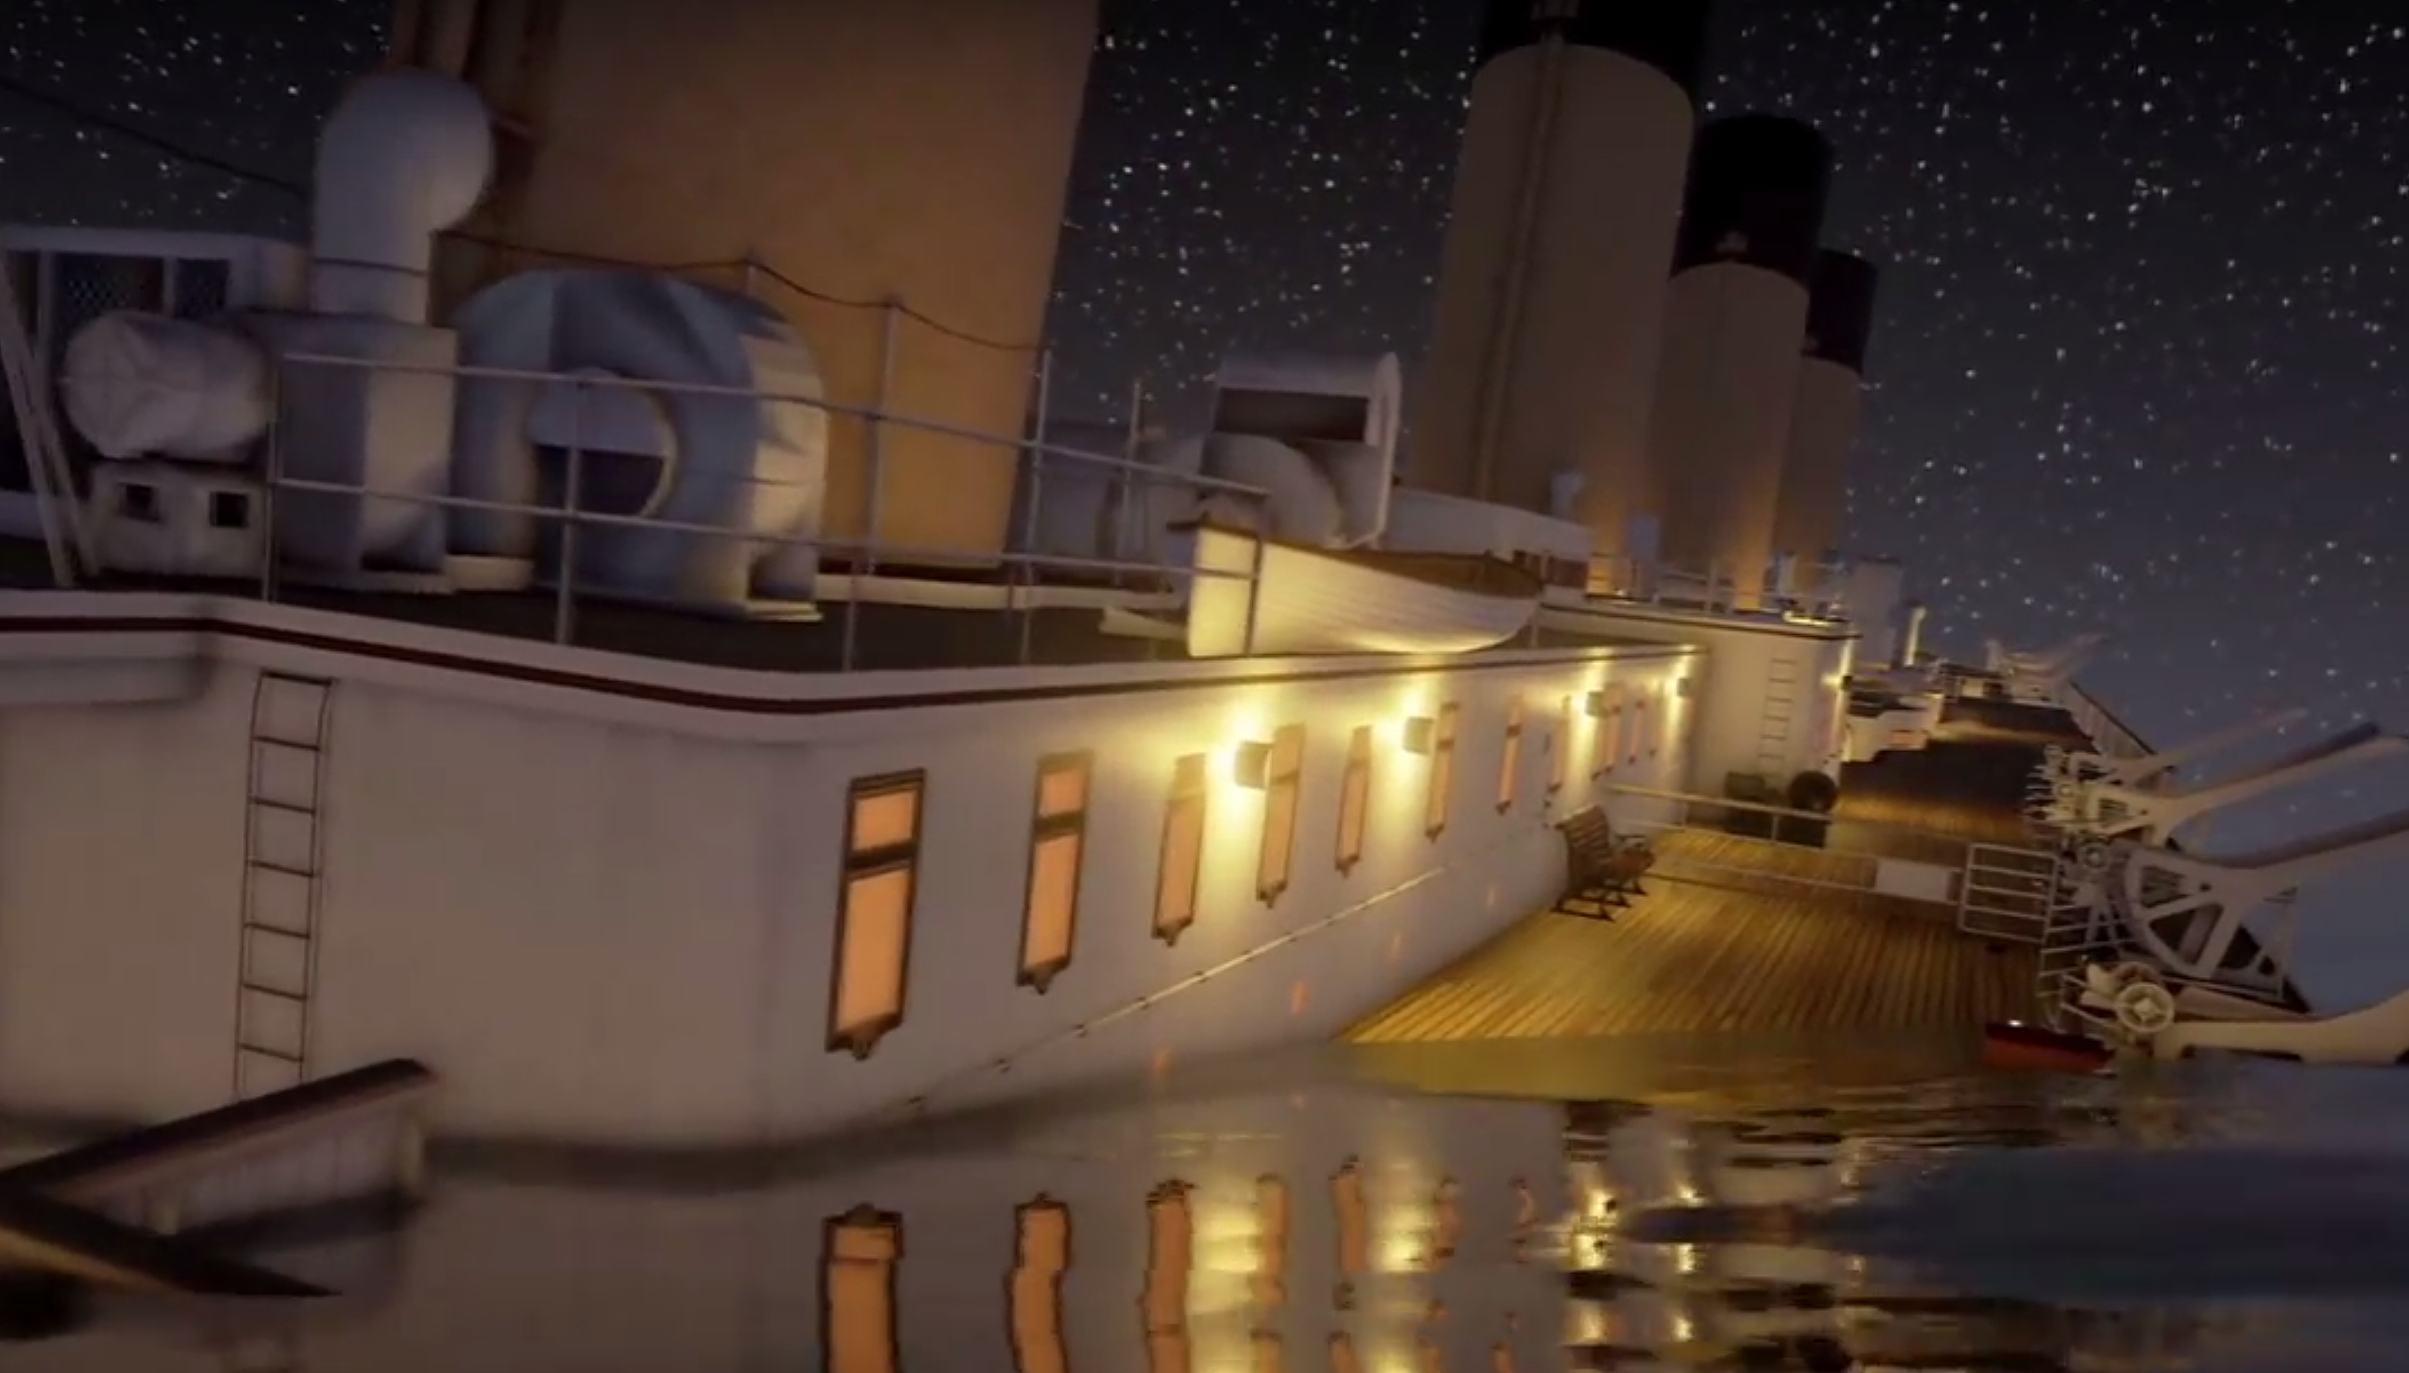 Amazing Video of Titanic Sinking in 'Real Time'